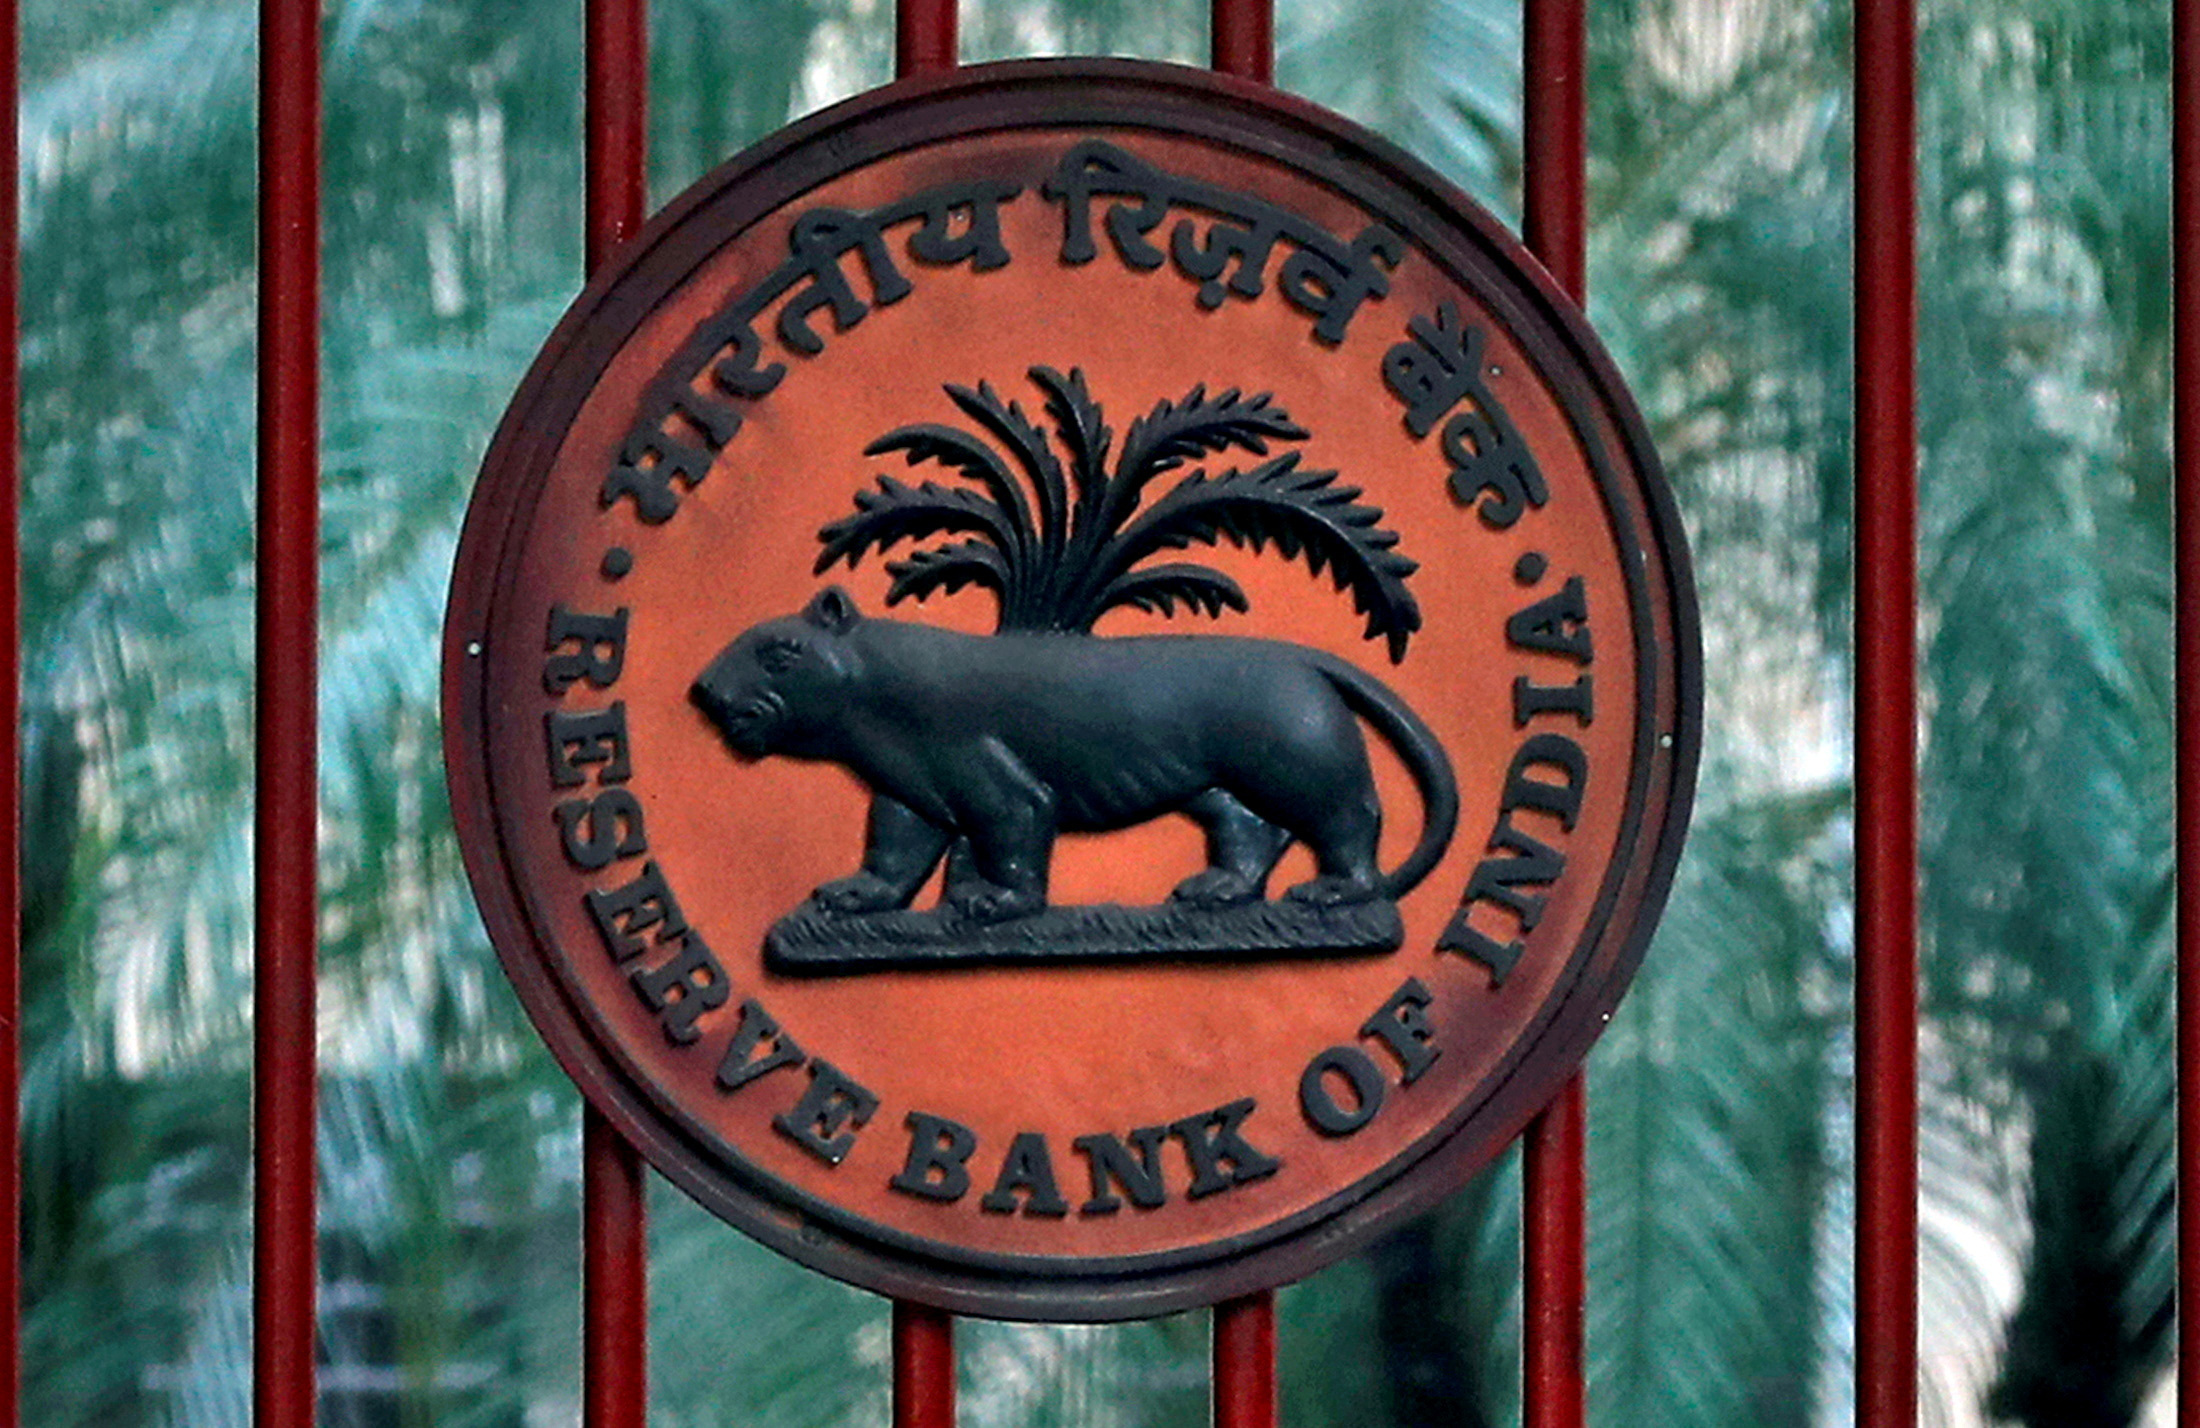 RBI to raise rates again, slim majority of economists expect 50 bps hike: Reuters poll | Reuters